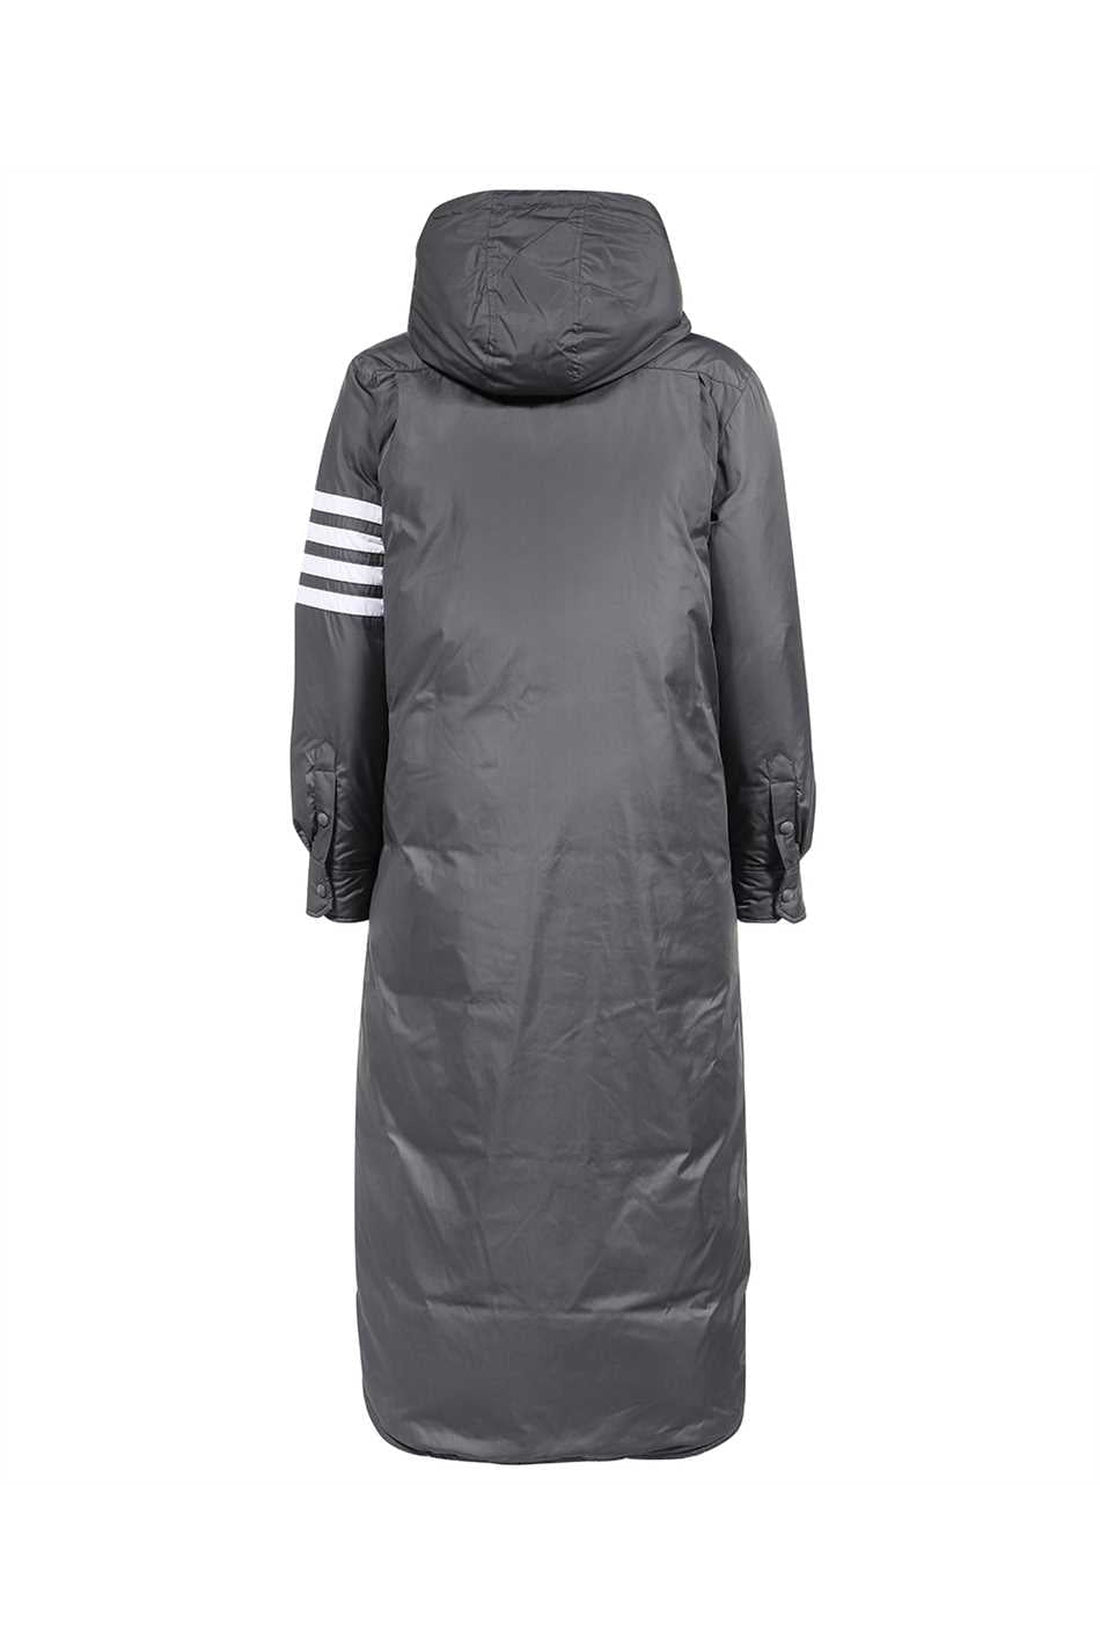 Thom Browne-OUTLET-SALE-Long quilted parka-ARCHIVIST